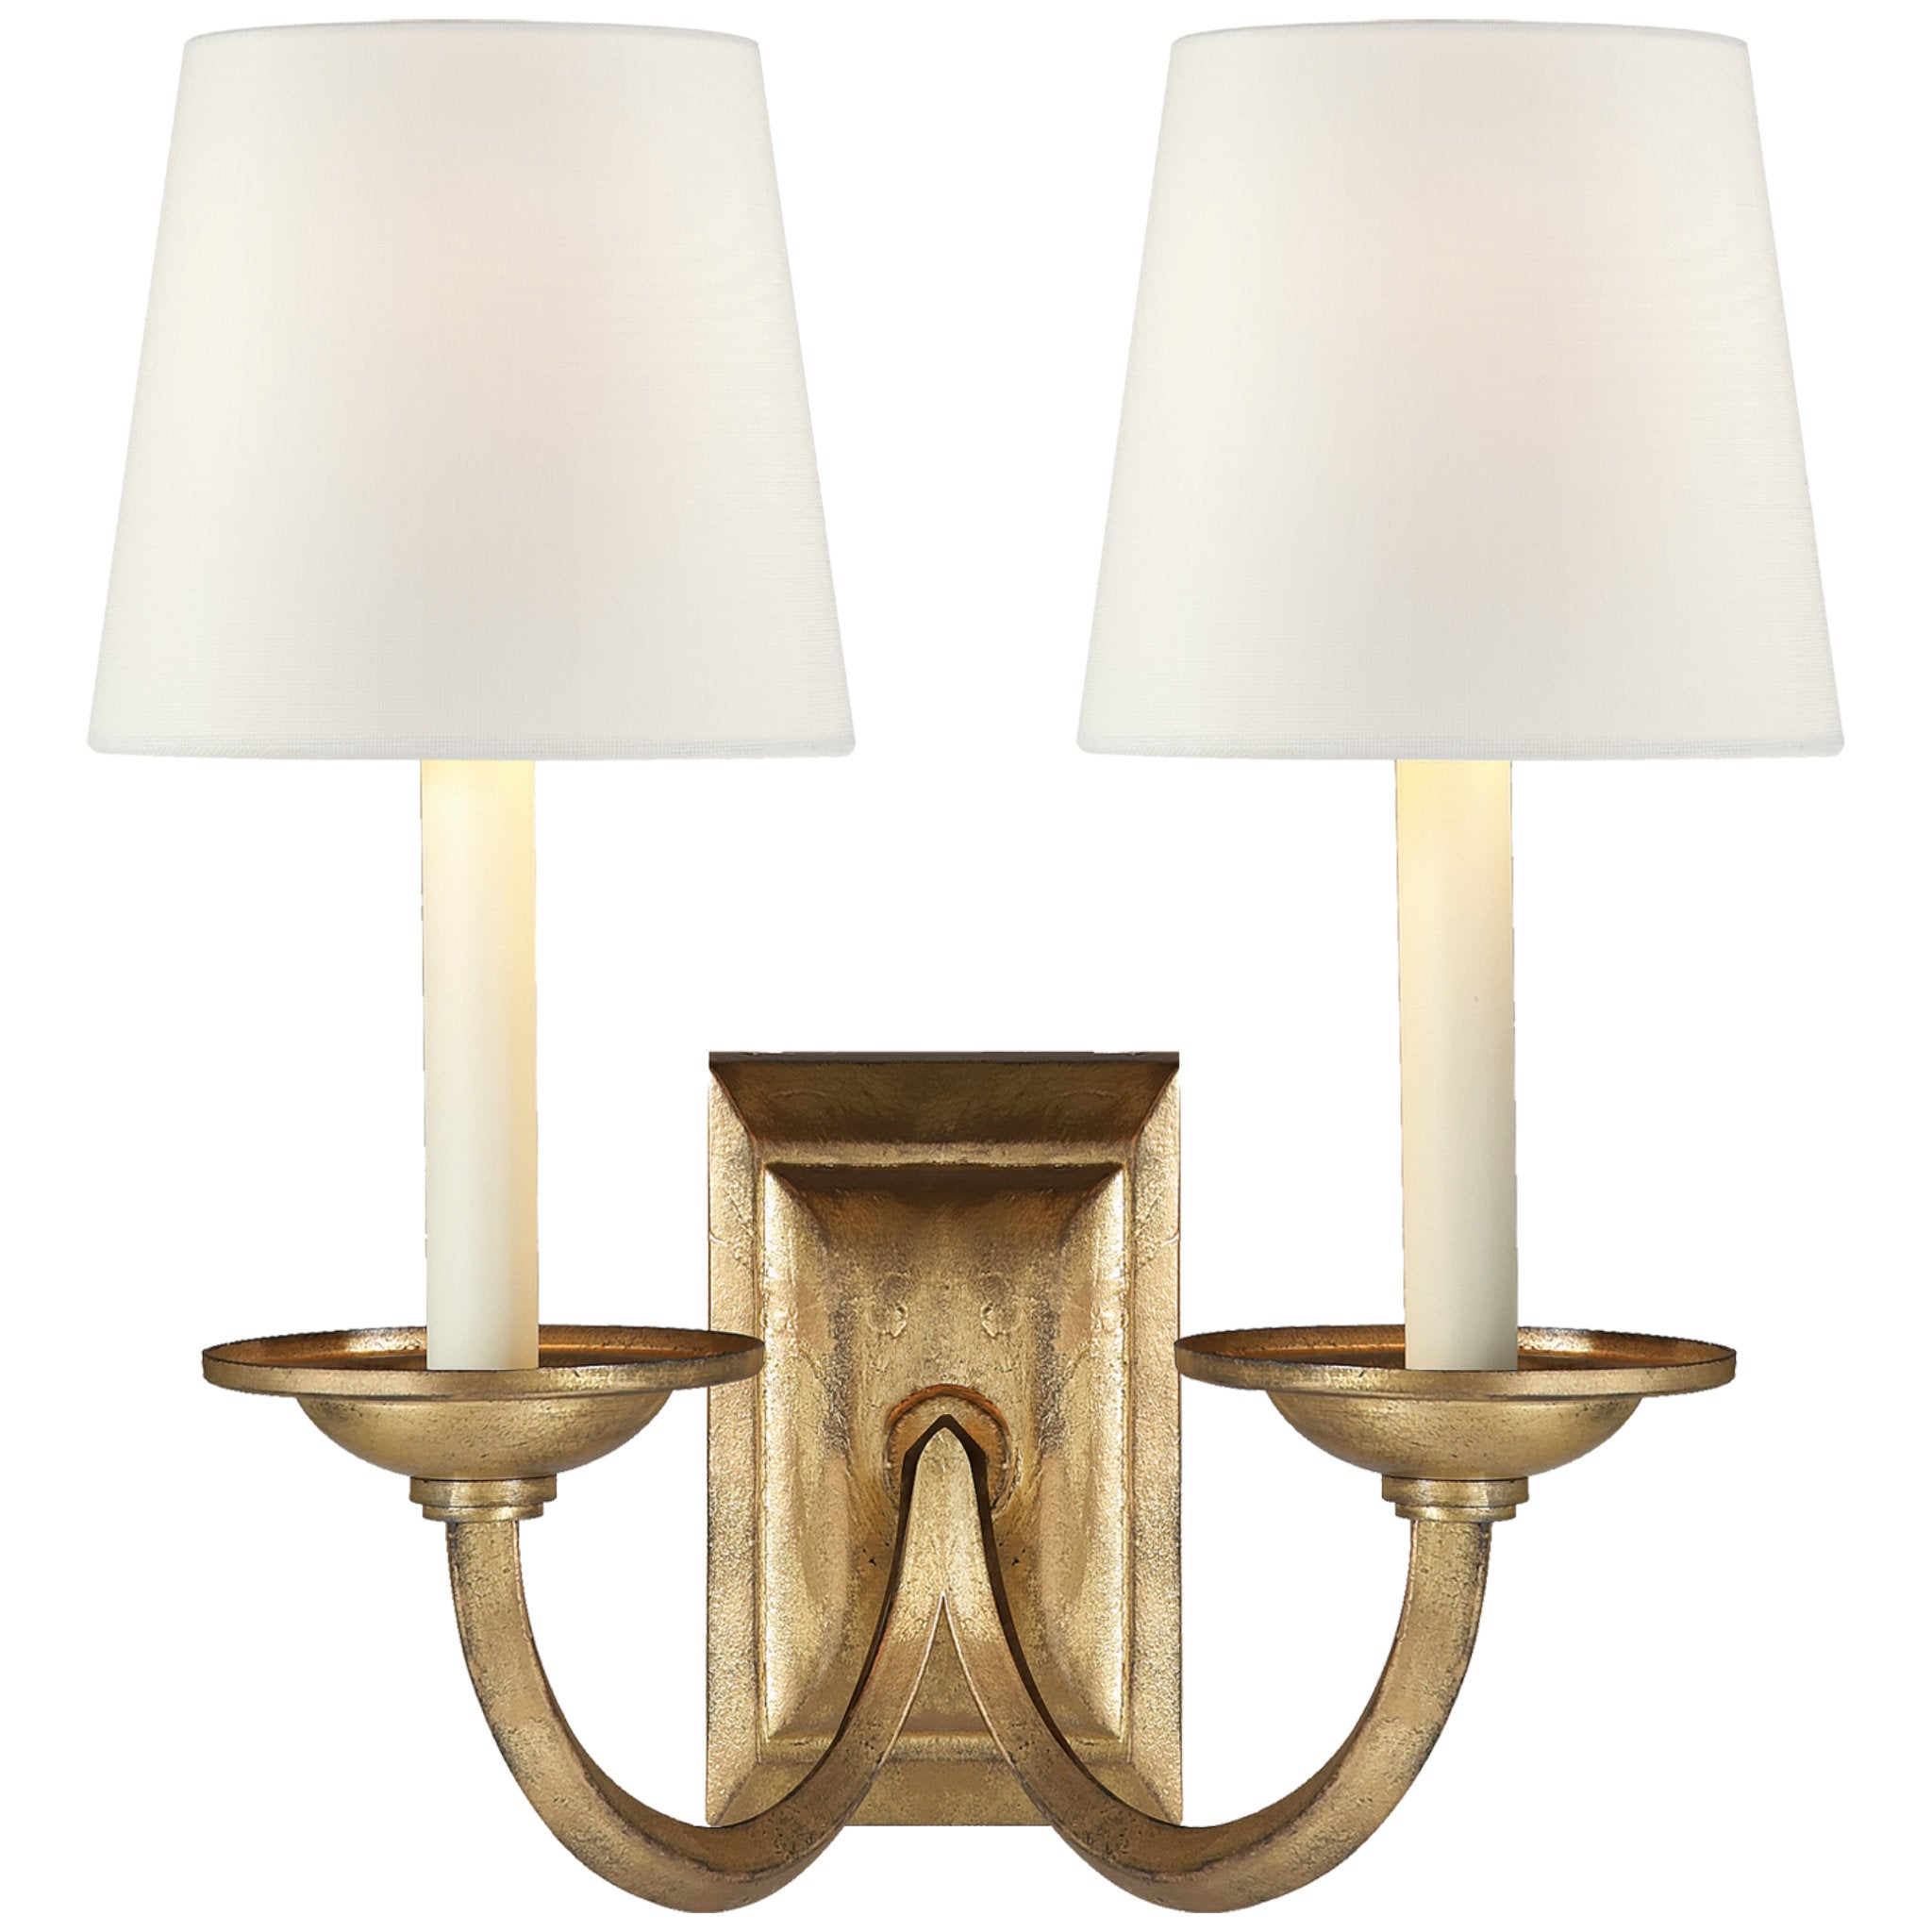 Chapman & Myers Flemish Double Sconce in Gilded Iron with Linen Shades